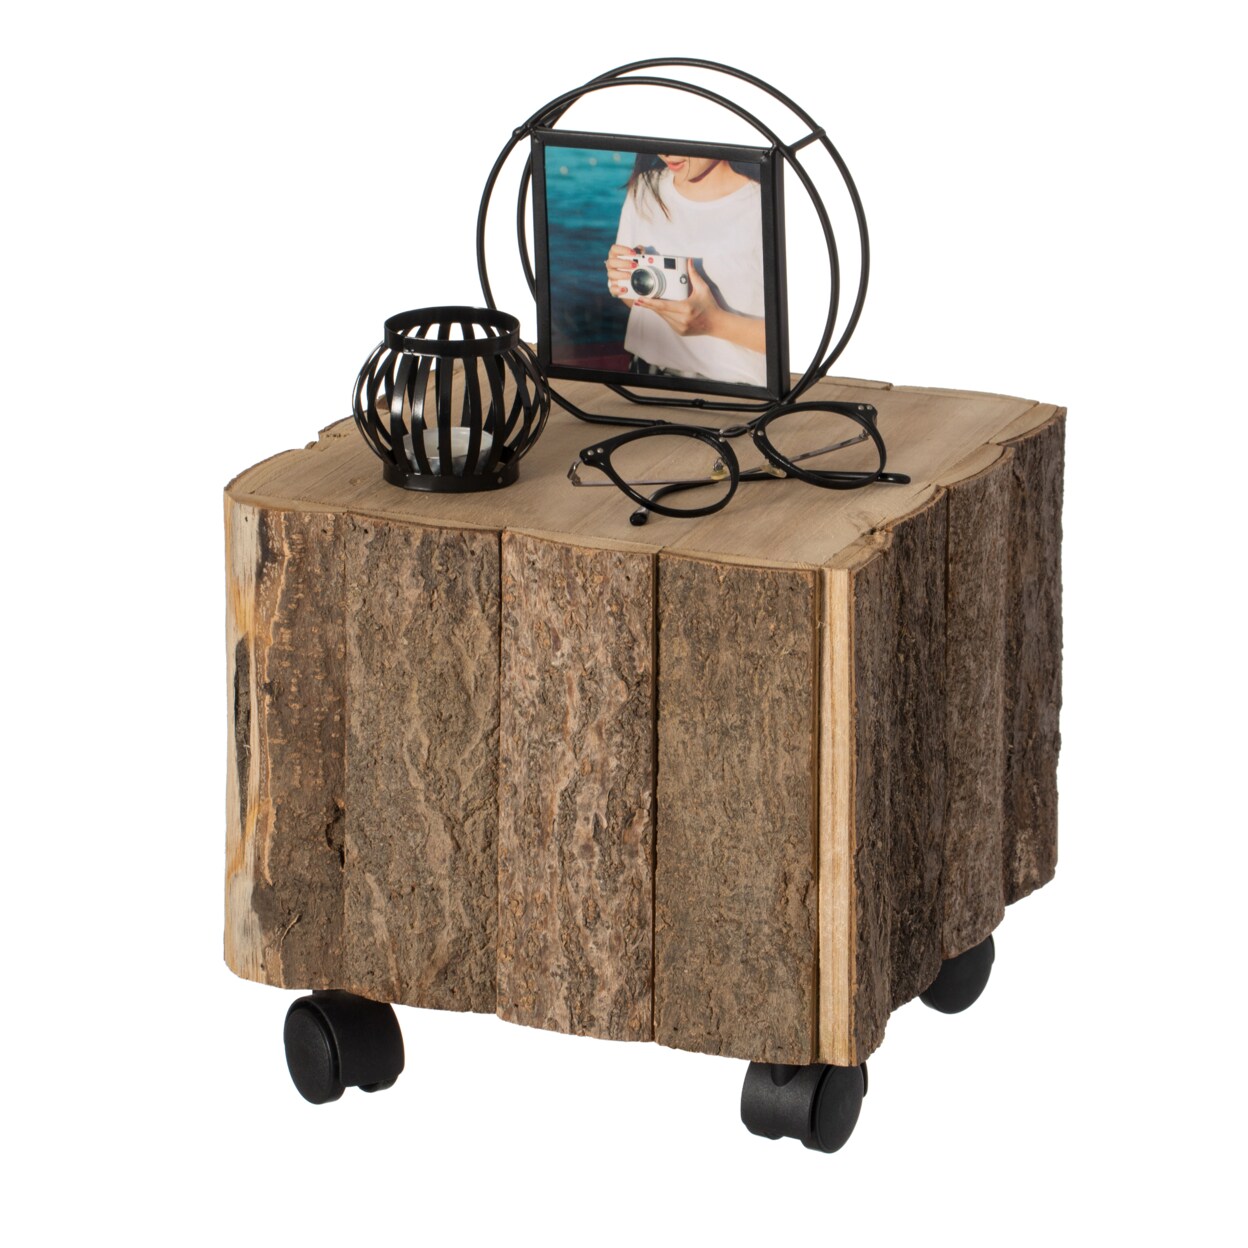 Vintiquewise Accent Decorative Natural Wooden Square Stump Stool with Wheels for Indoor and Outdoor